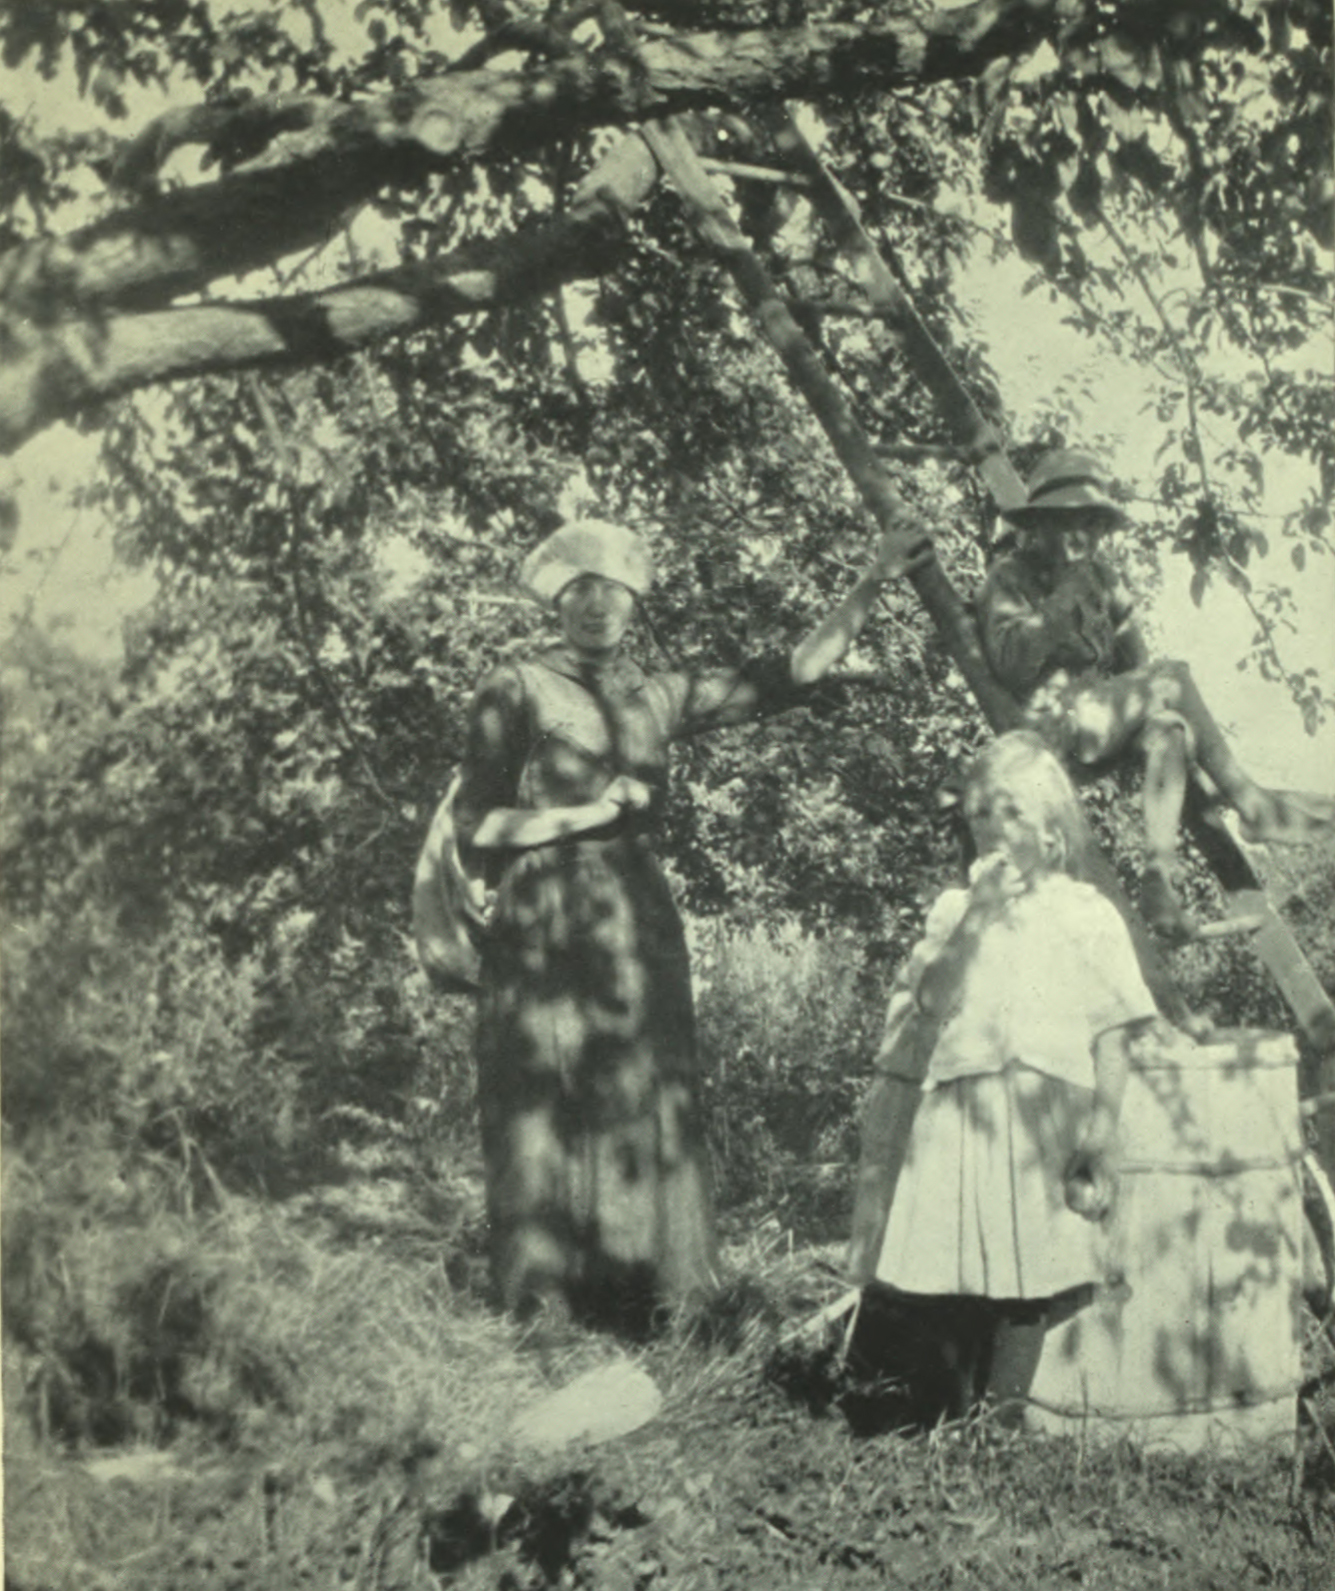 People relaxing in the orchard, a child is eating an apple.